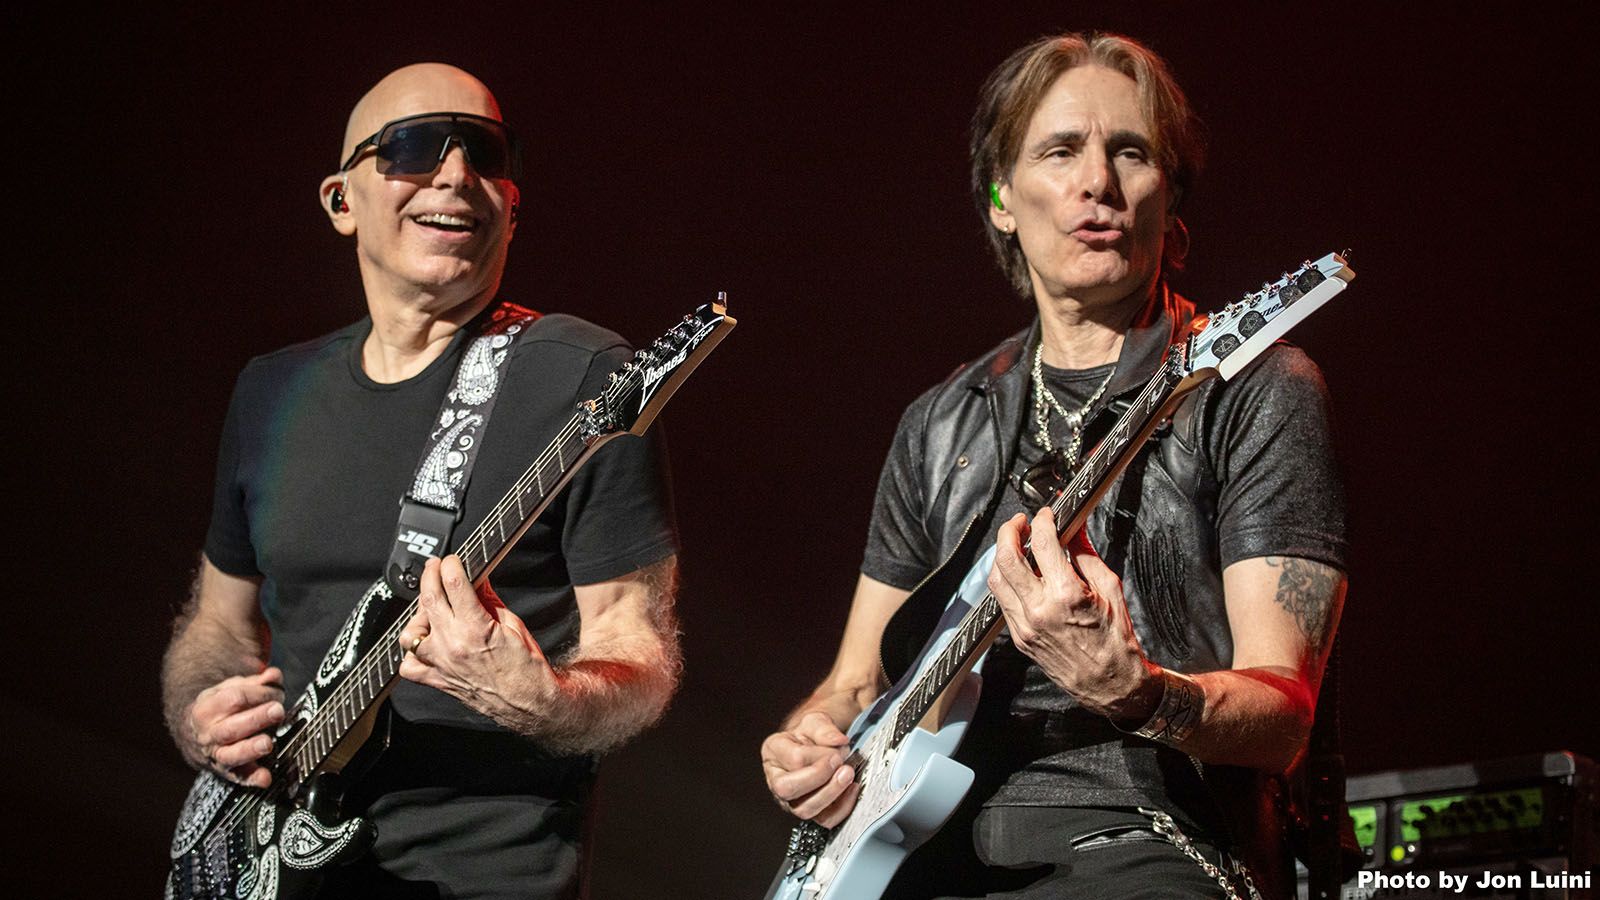 Joe Satriani and Steve Vai will be in town on April 20 to perform at Embassy Theatre.